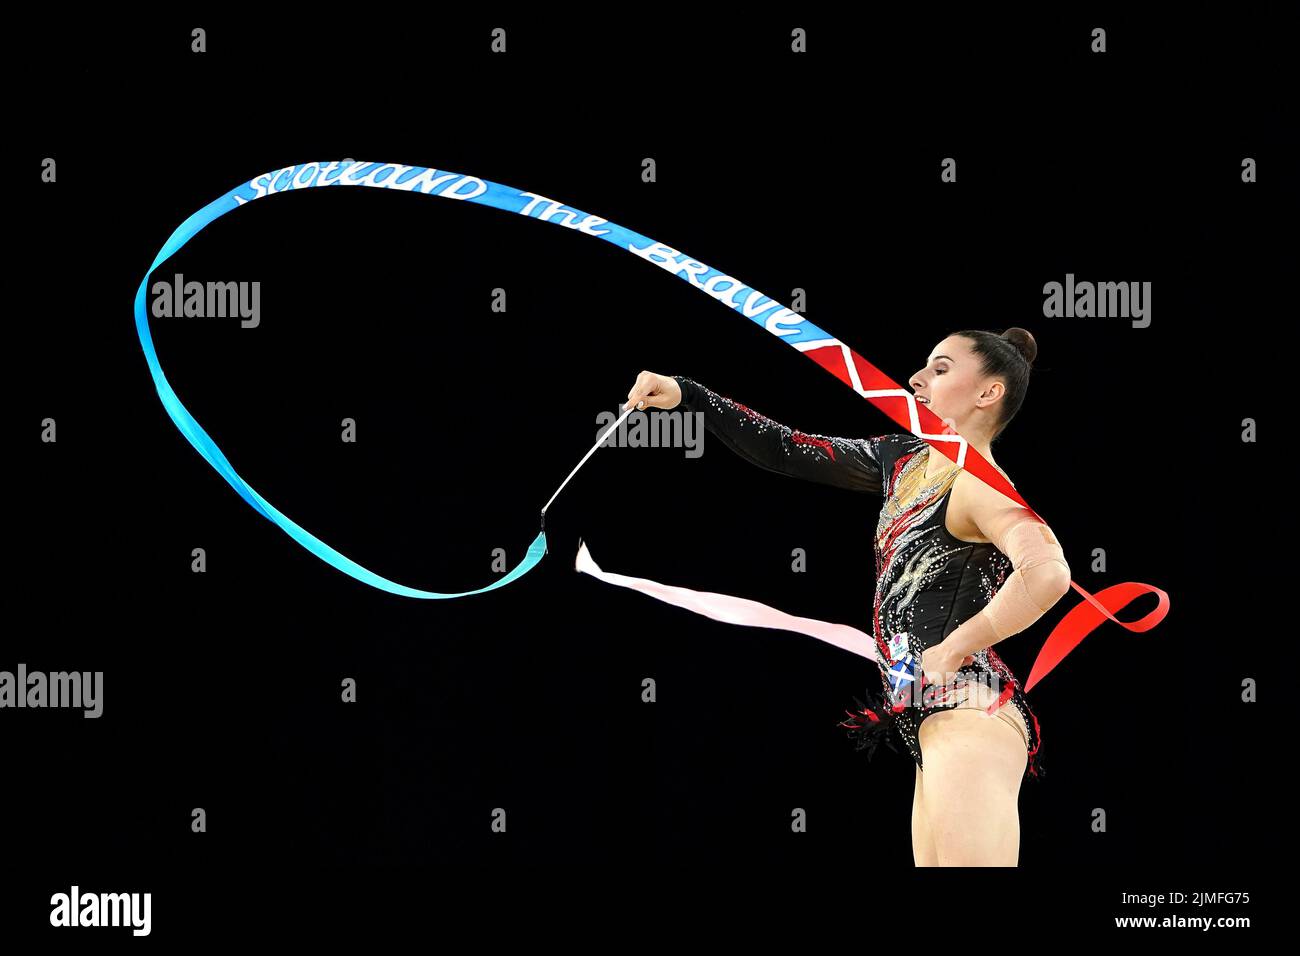 Scotland's Louise Christie competes with ribbon during the Ribbon Final at Arena Birmingham on day nine of the 2022 Commonwealth Games in Birmingham. Picture date: Saturday August 6, 2022. Stock Photo